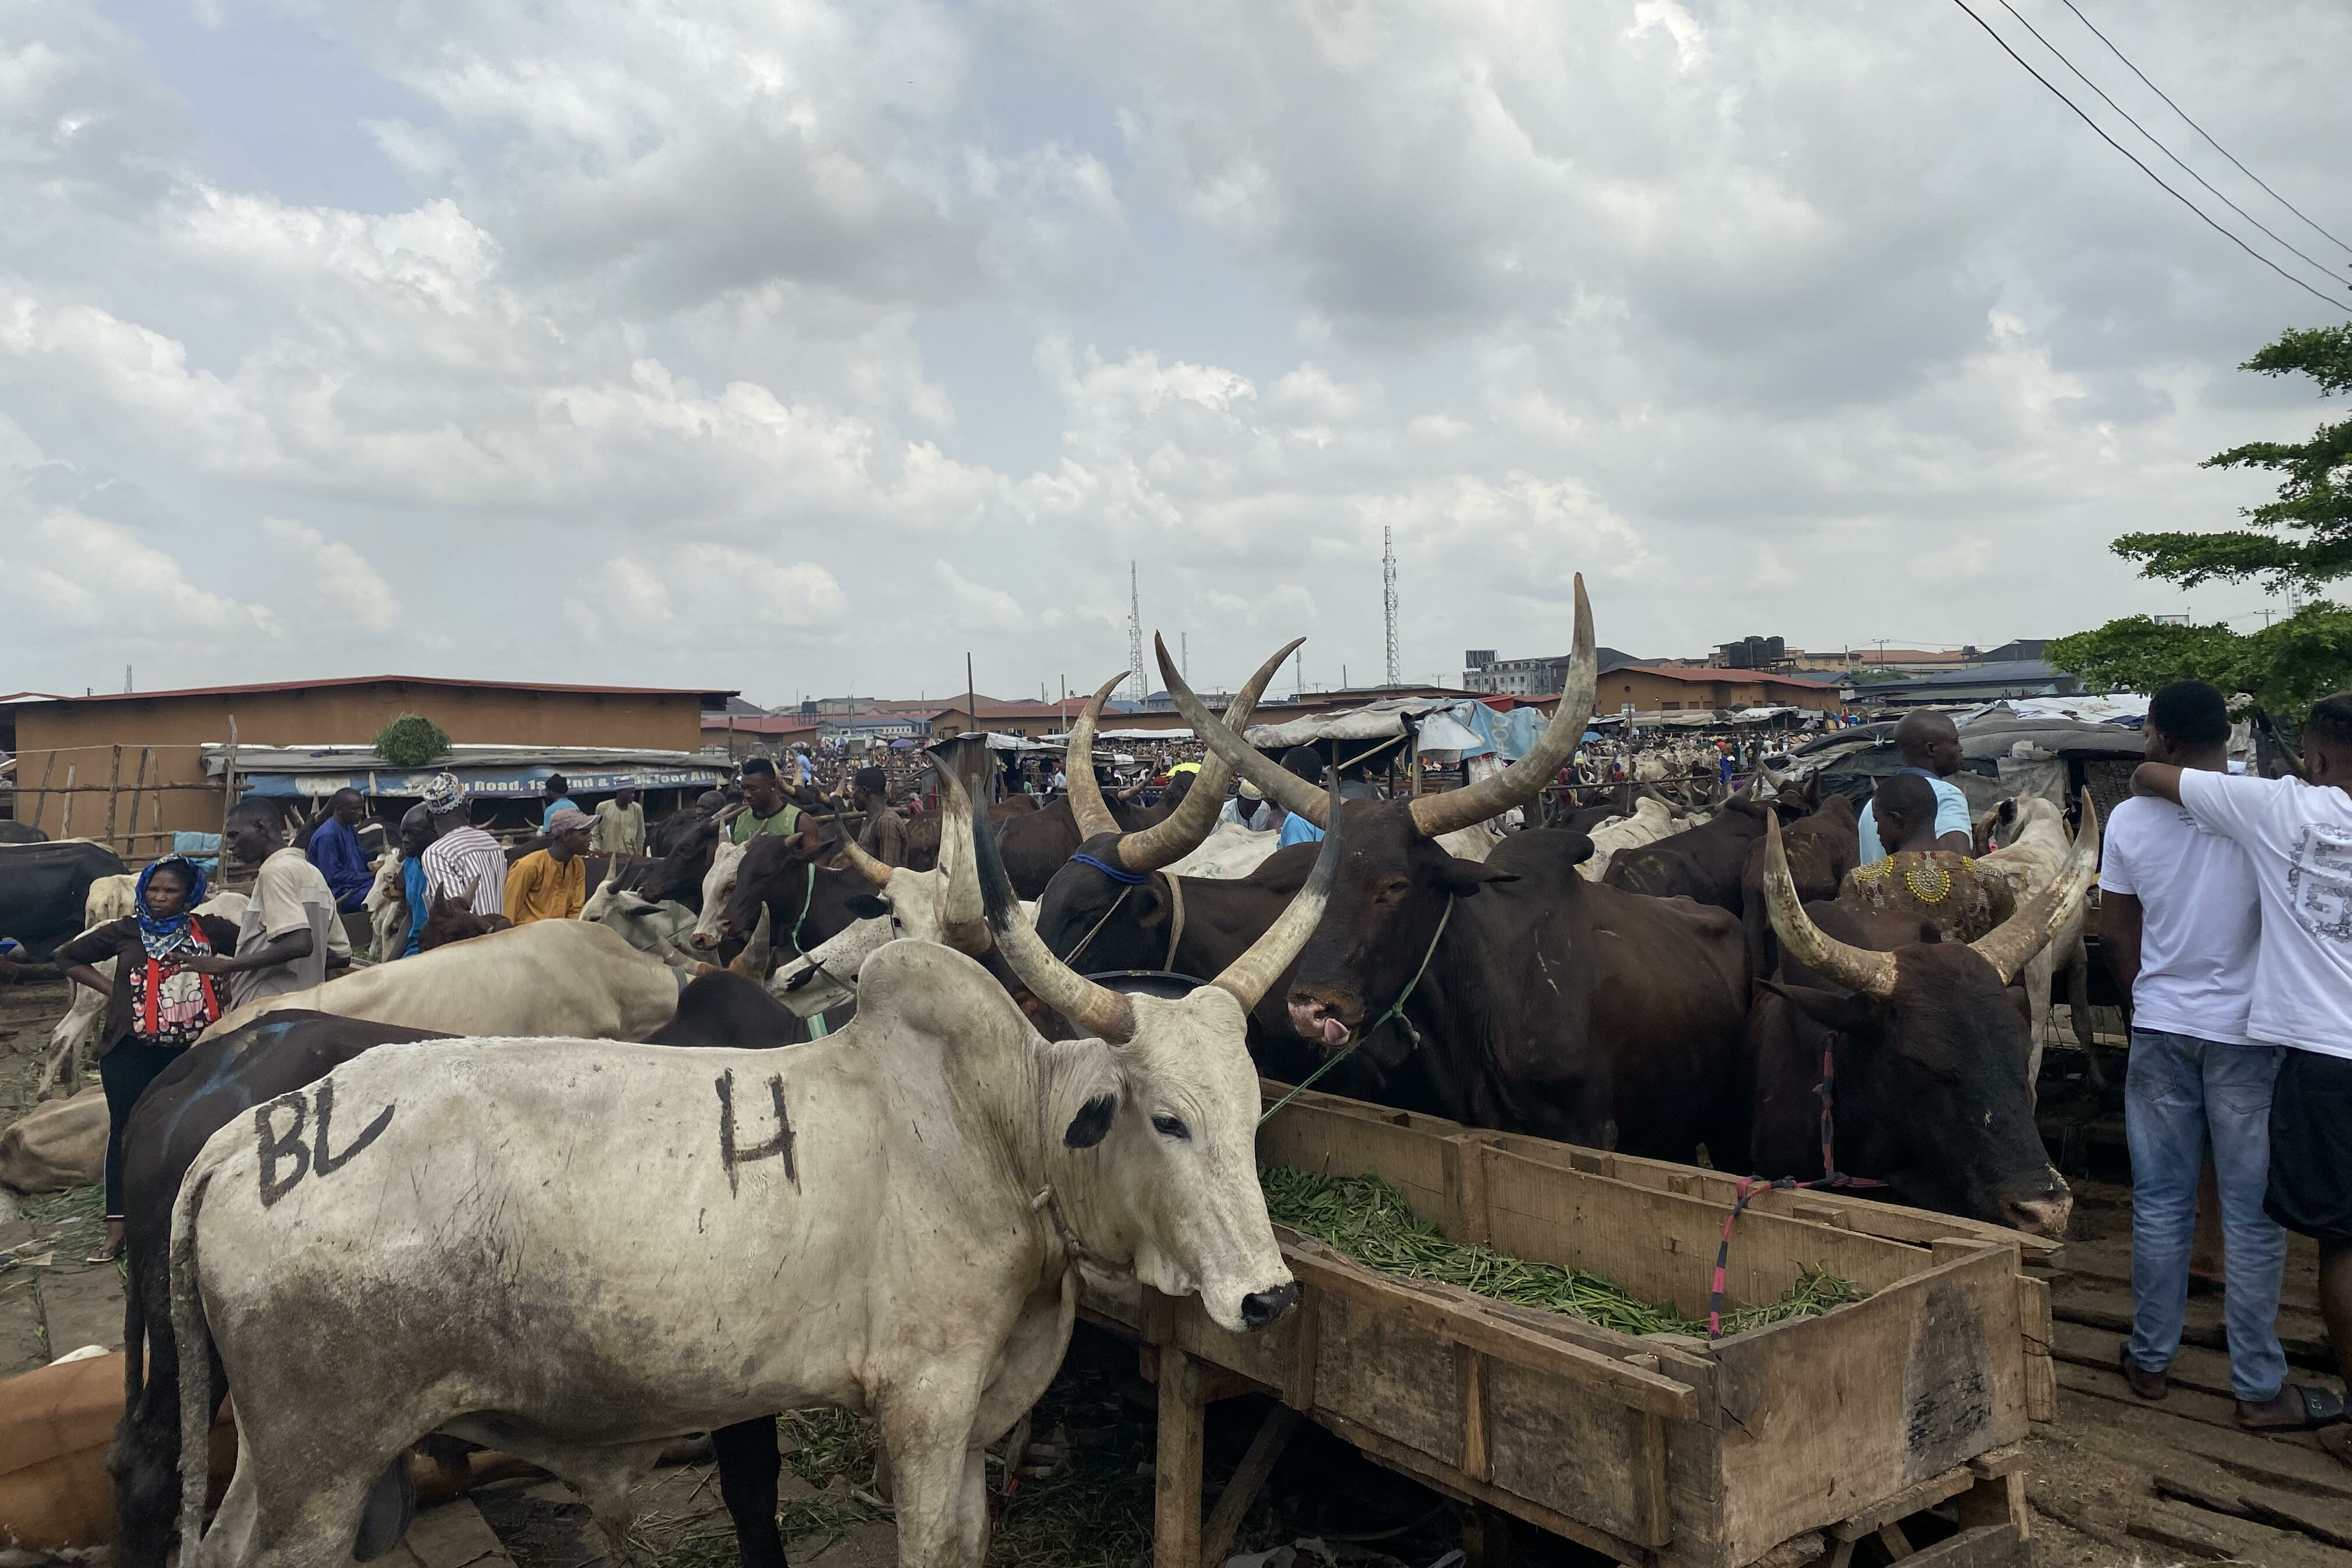 SPECIAL REPORT: Inside Lagos Abattoir Where Sick, Dead Animals Are Slaughtered and Vets Turn Blind Eye